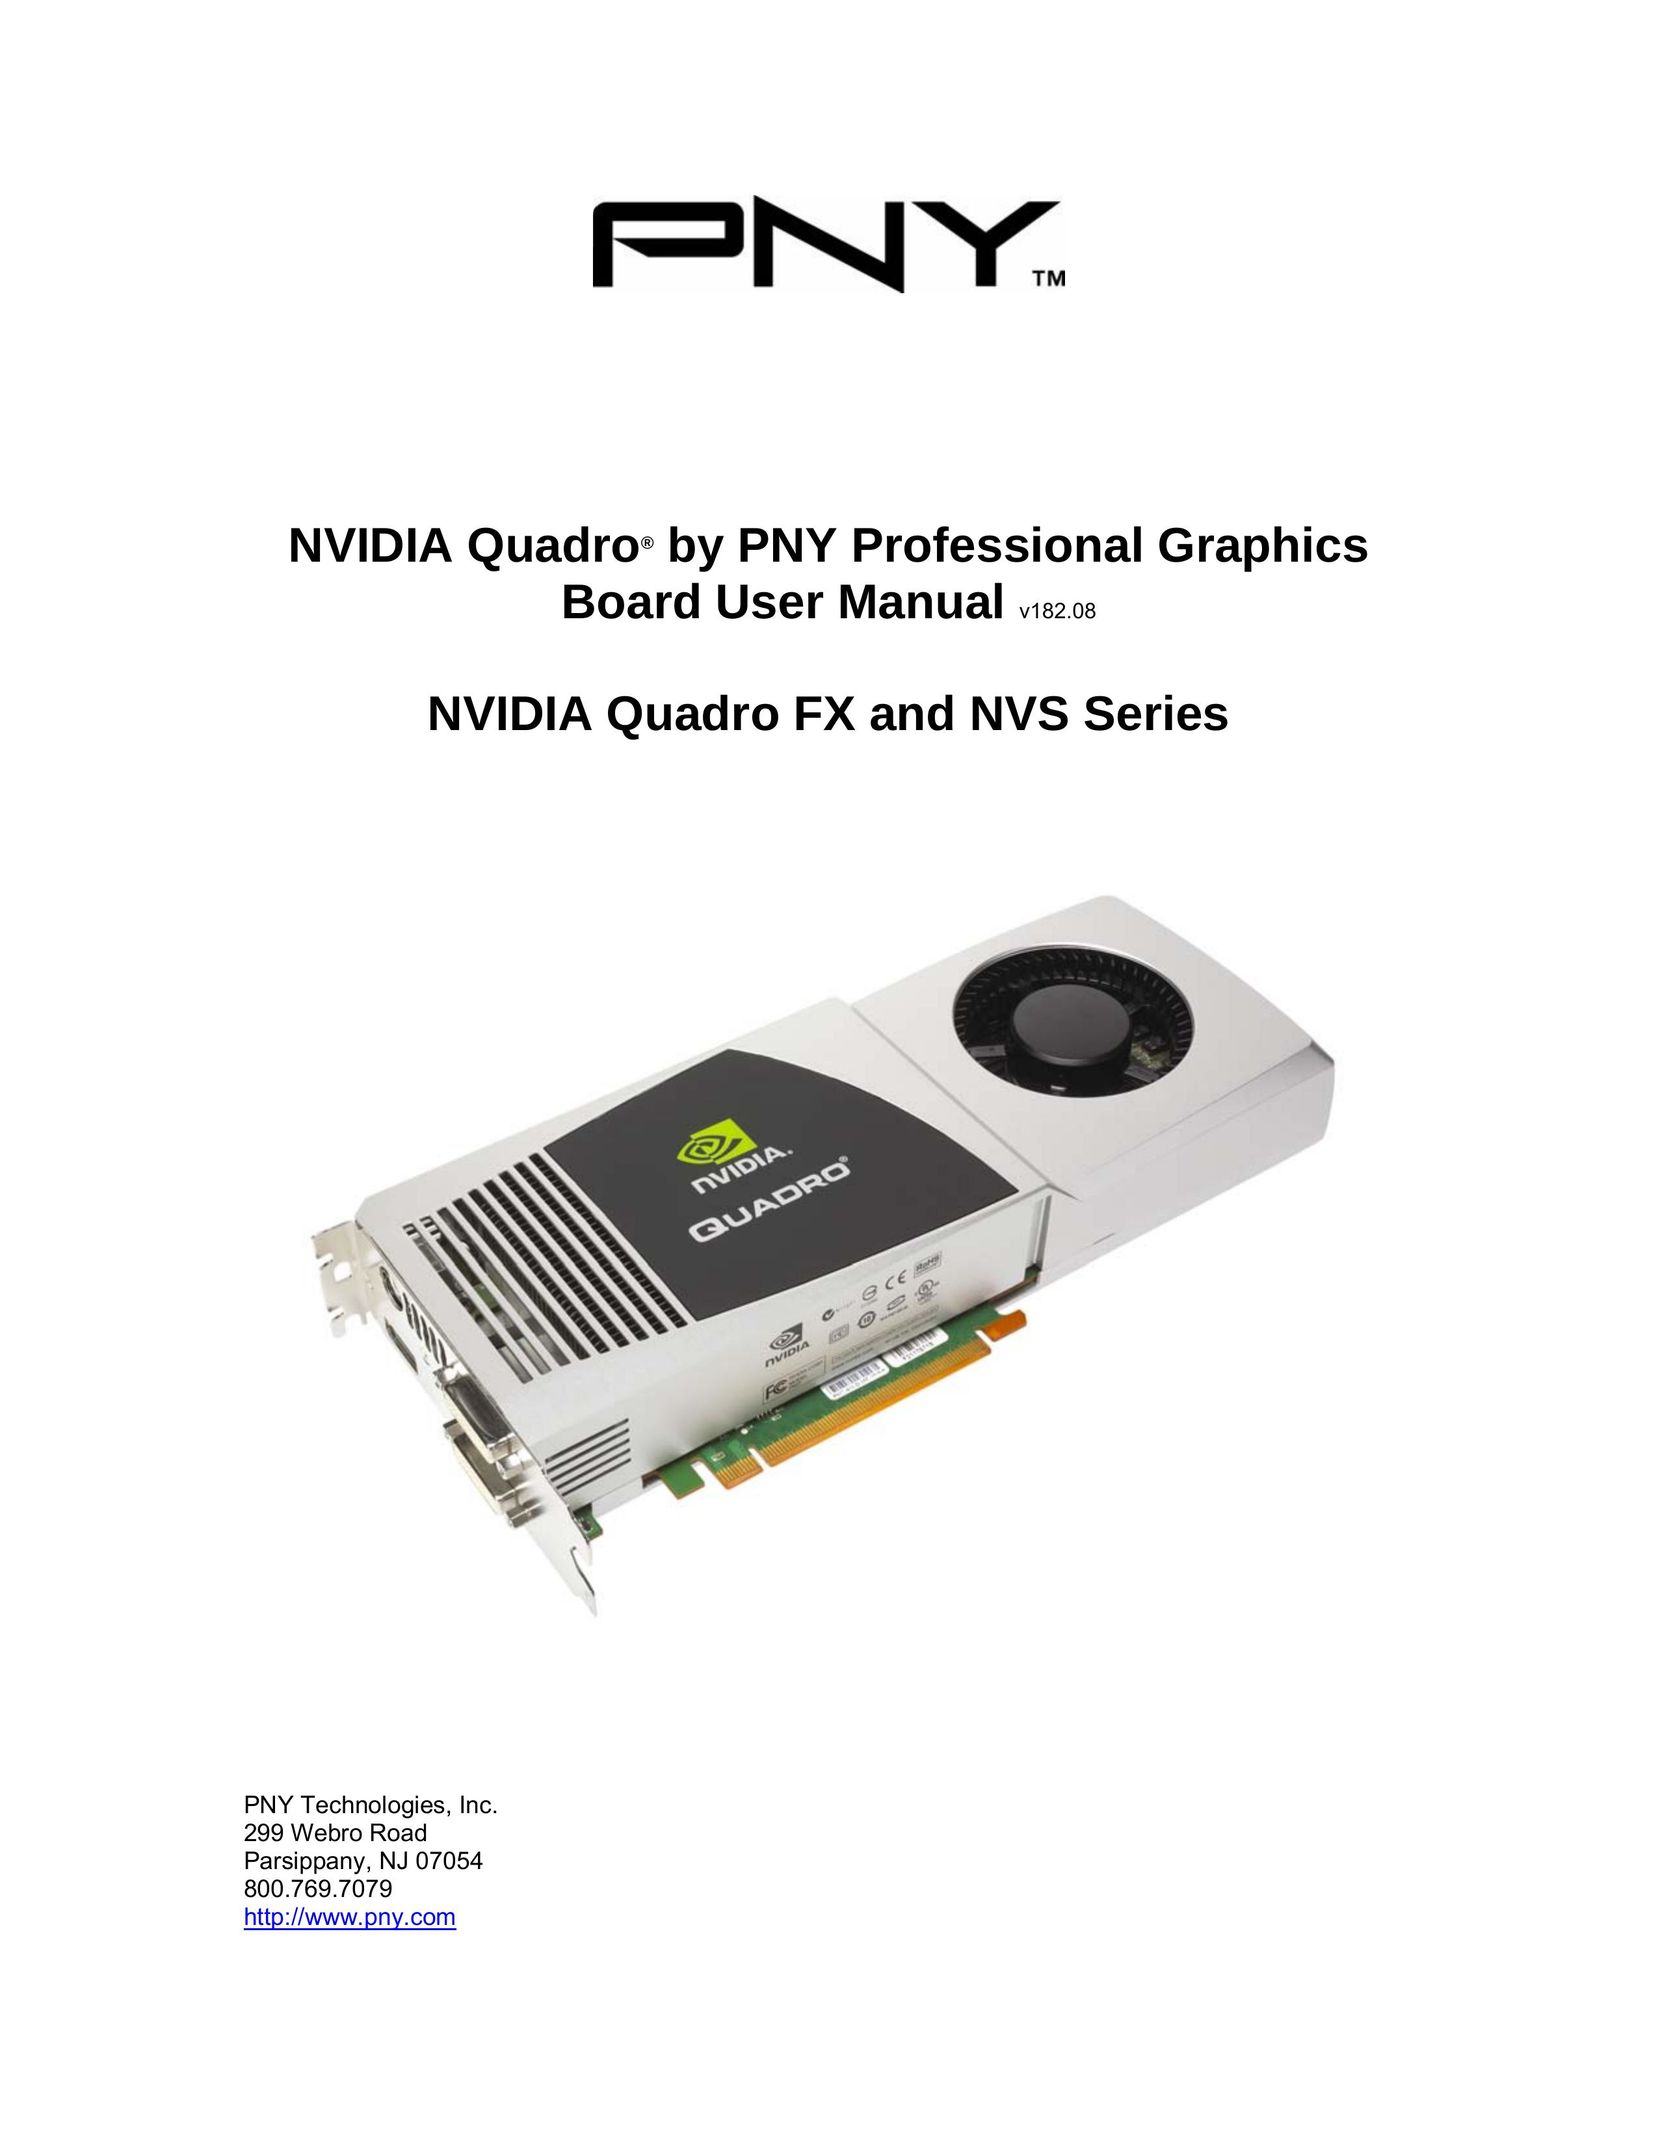 PNY FX 5800G Computer Hardware User Manual